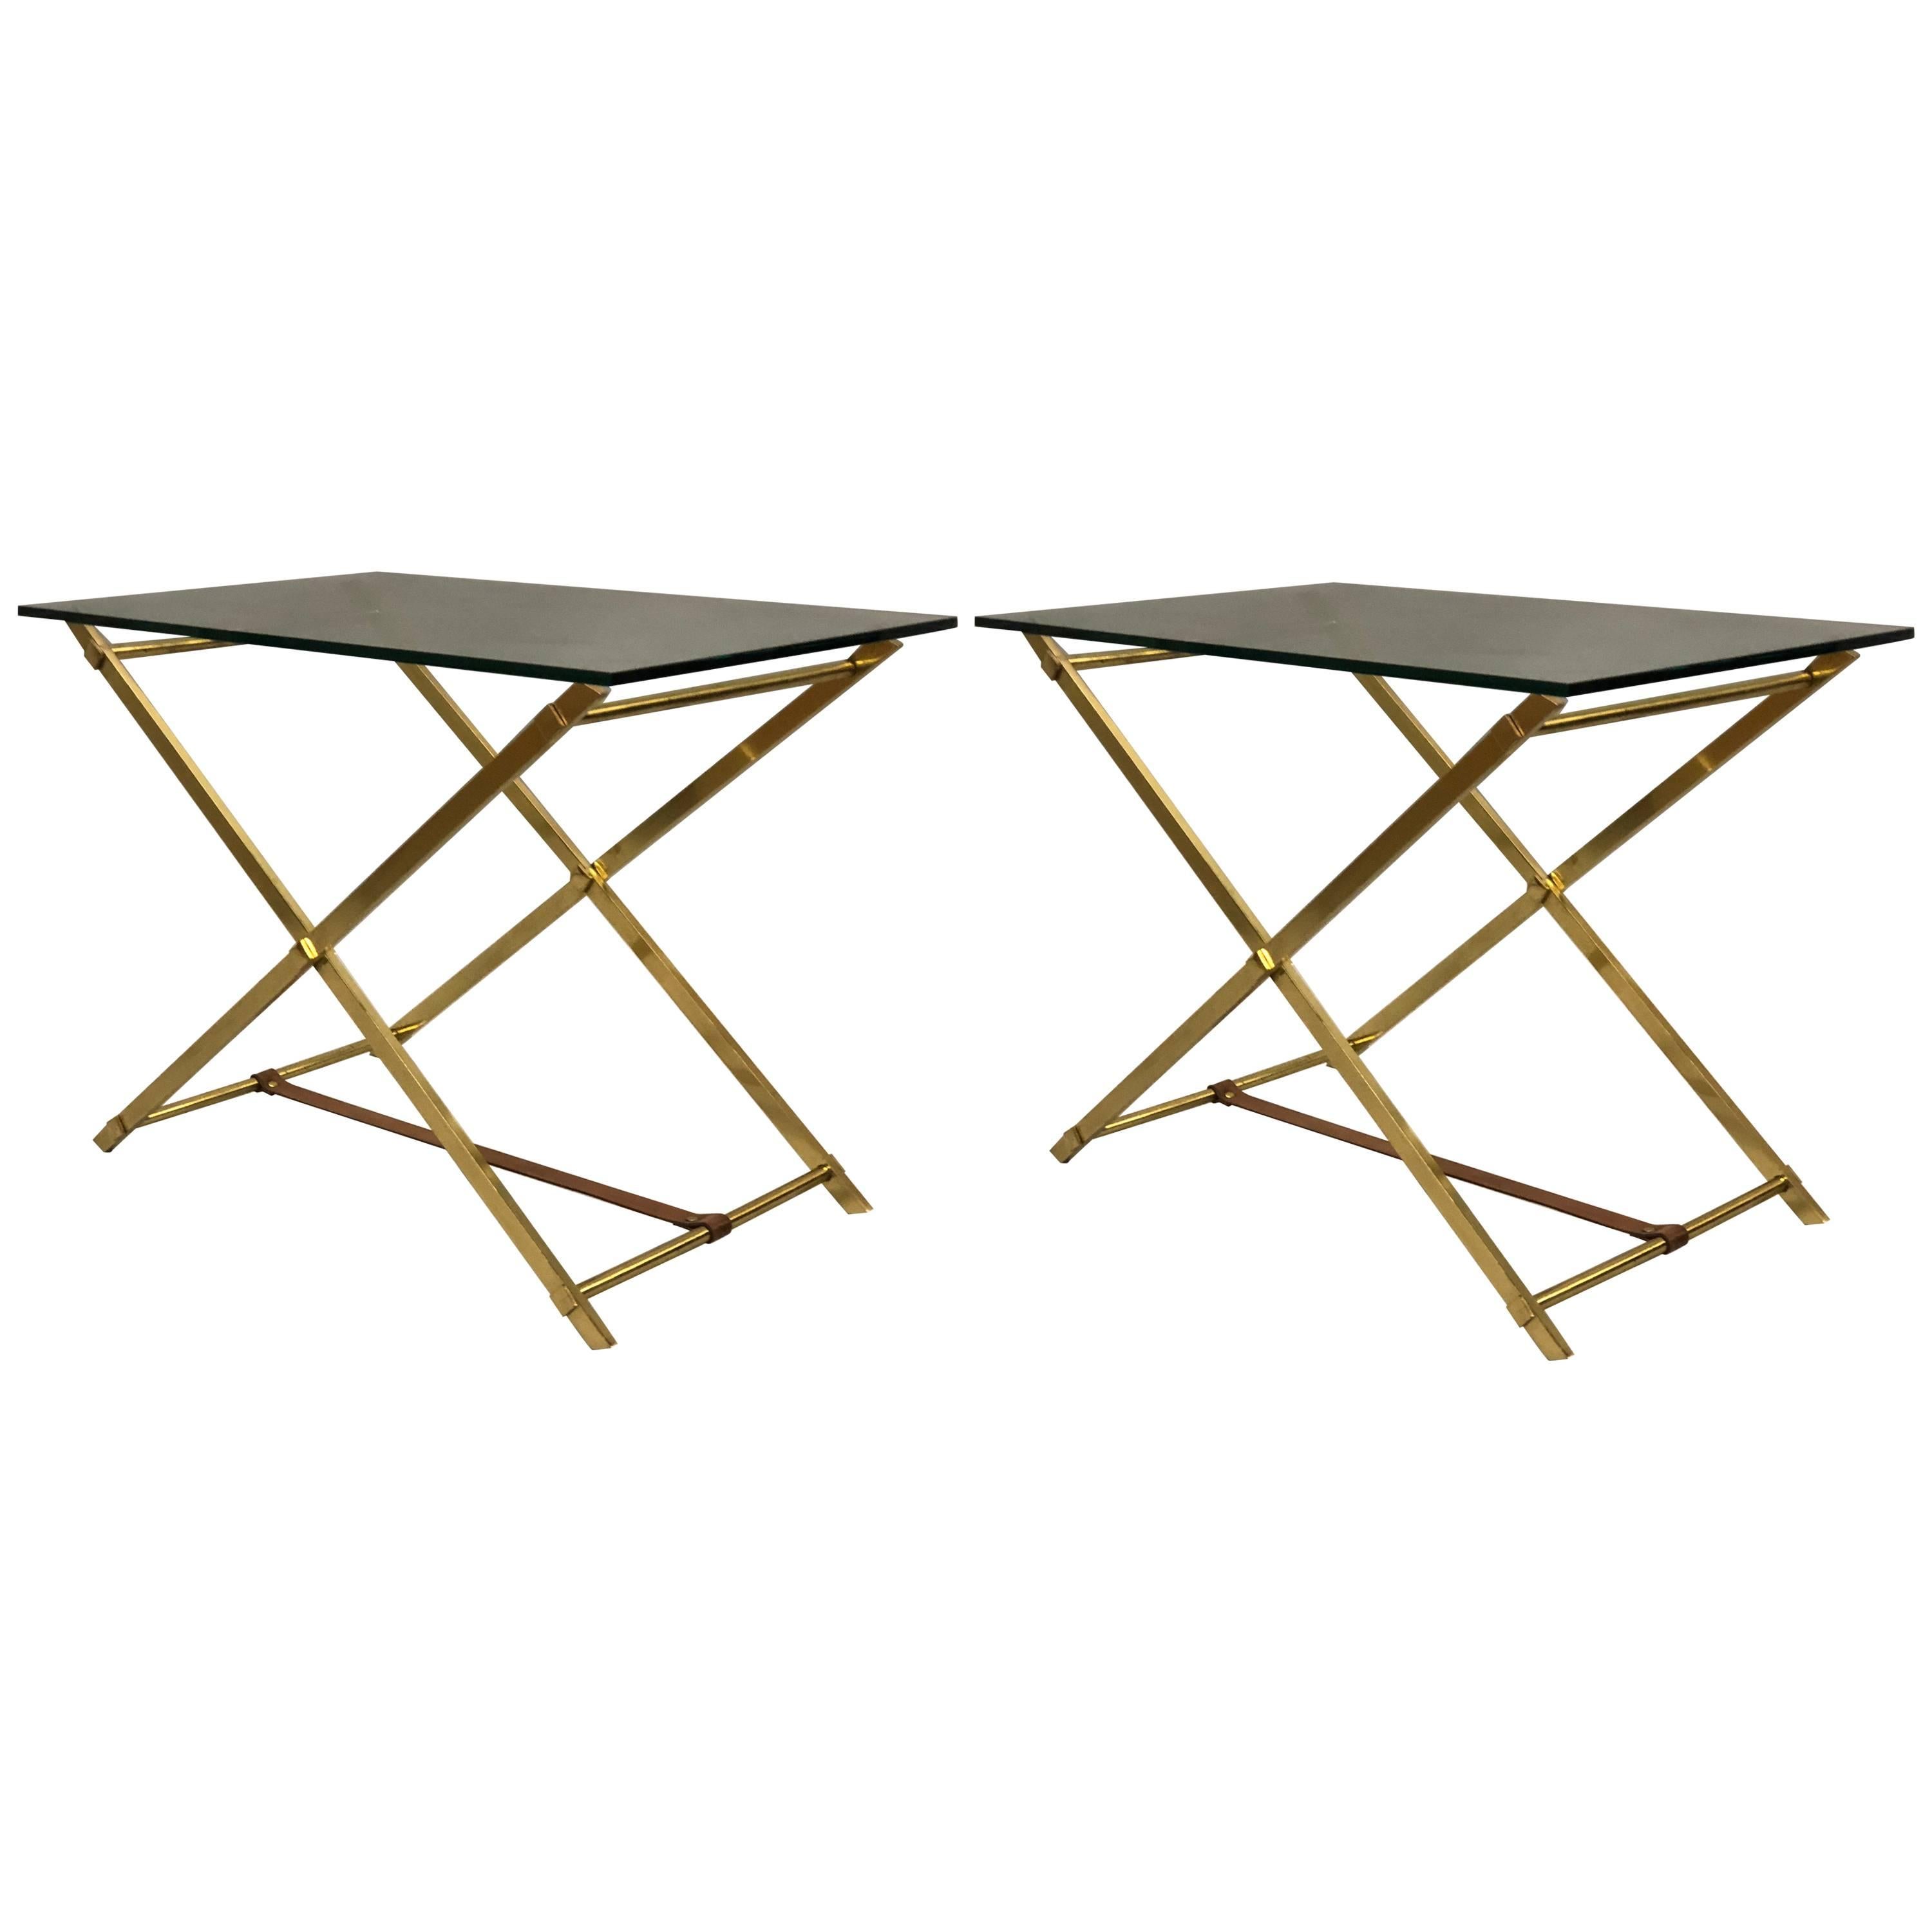 Pair of Mid-Century Modern Brass, Leather and Glass Side Tables by Hermes